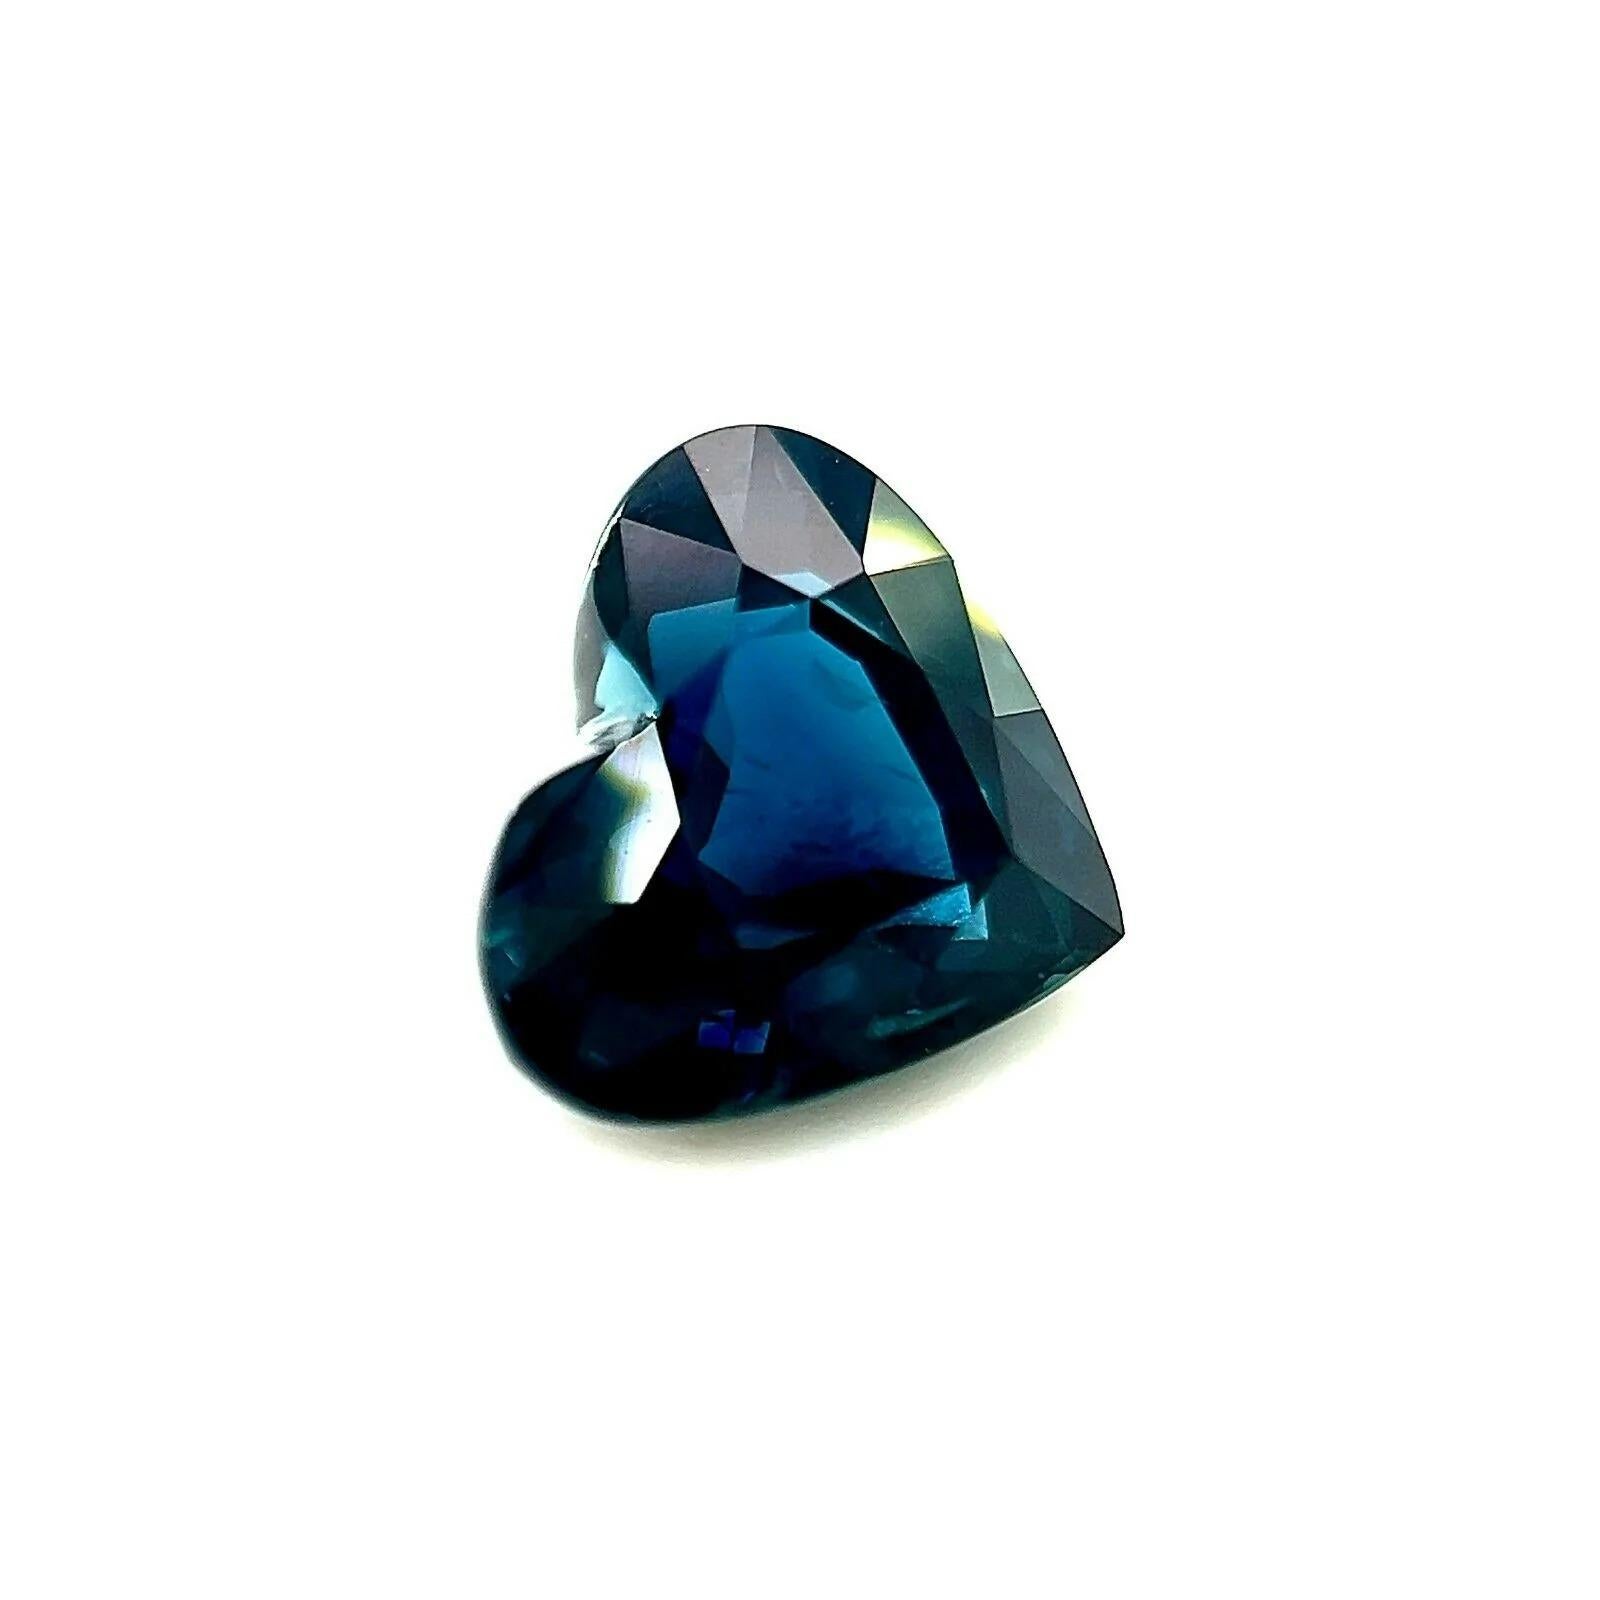 Fine 3.08ct Deep Blue Natural Sapphire Heart Cut Loose Rare Gemstone 9.2x8mm

Natural Deep Blue Sapphire Gemstone.
3.08 Carat with a beautiful deep blue colour and excellent clarity, a very clean stone. Also has an excellent heart cut and ideal